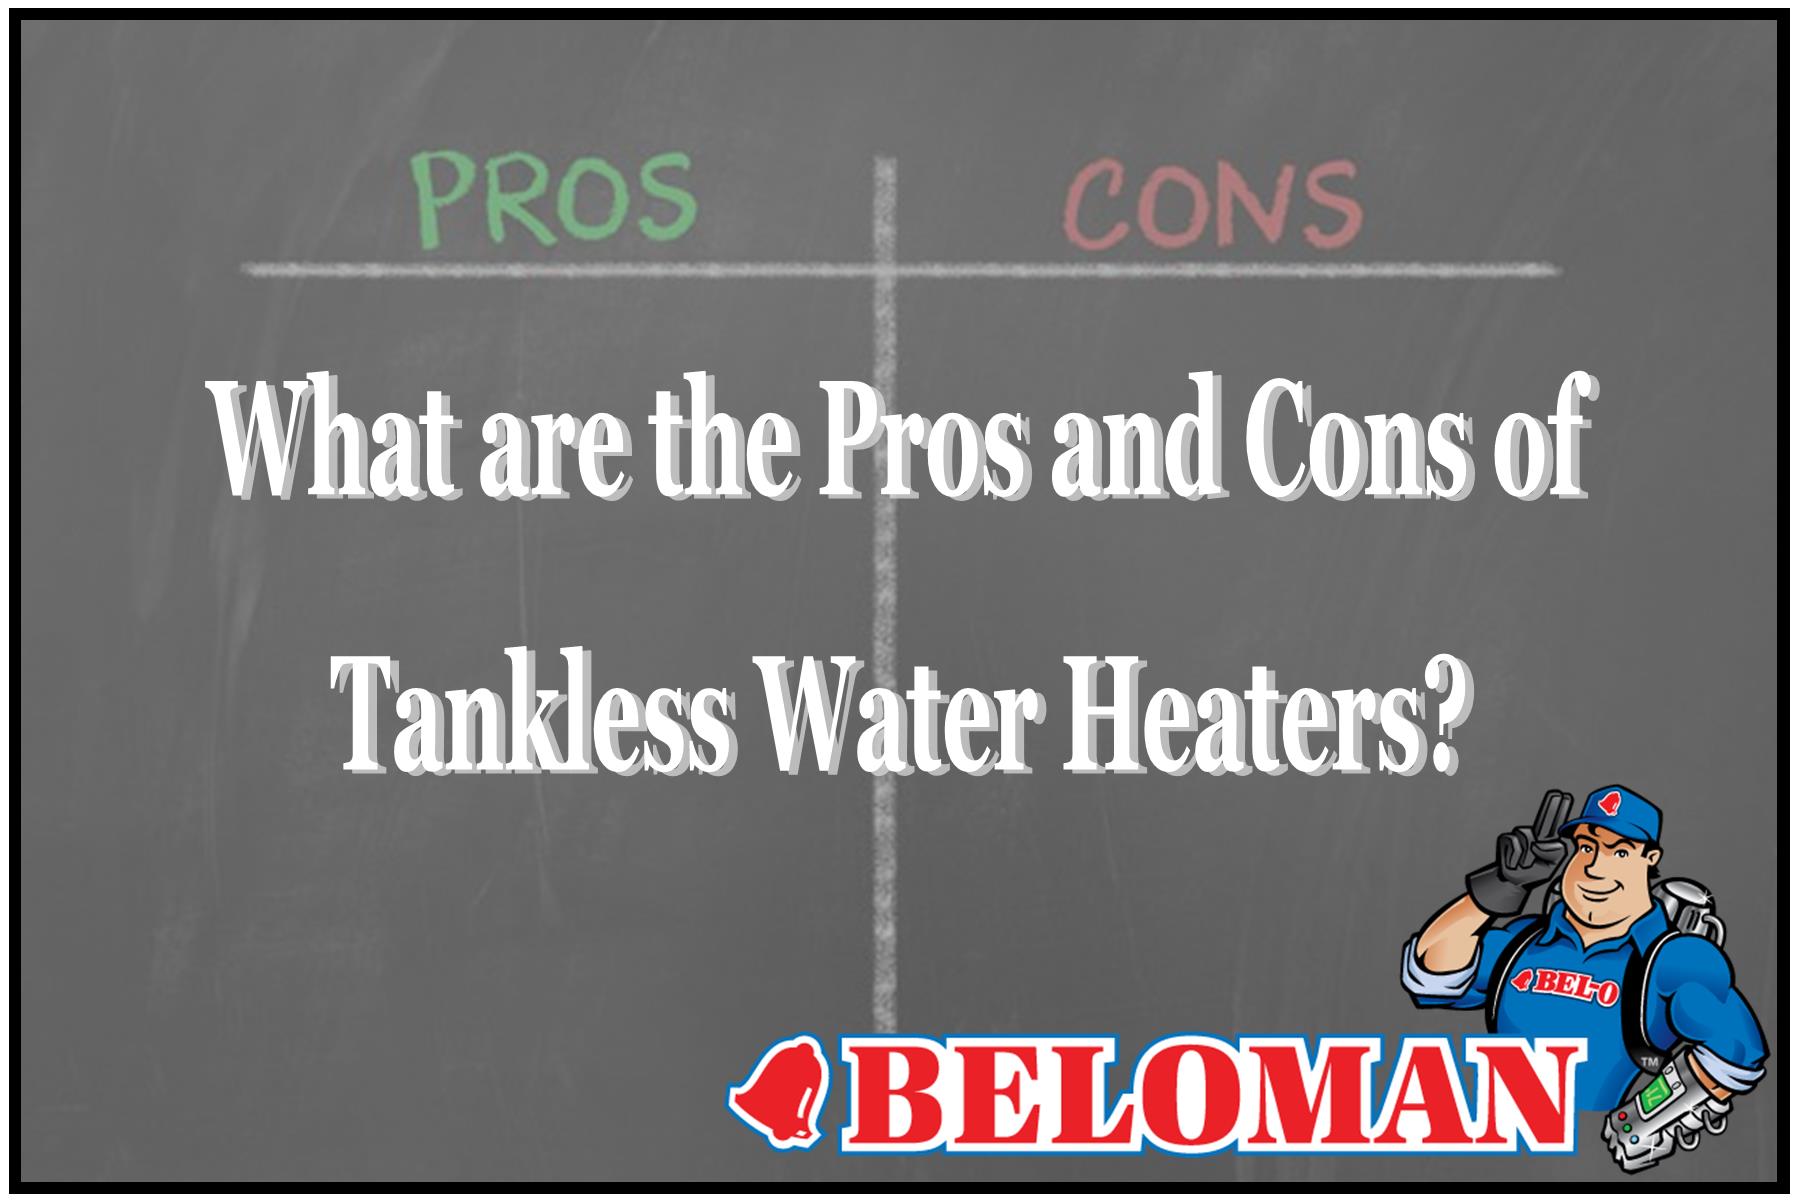 Pros and Cons of Tankless Water Heaters Chalkboard Graphic